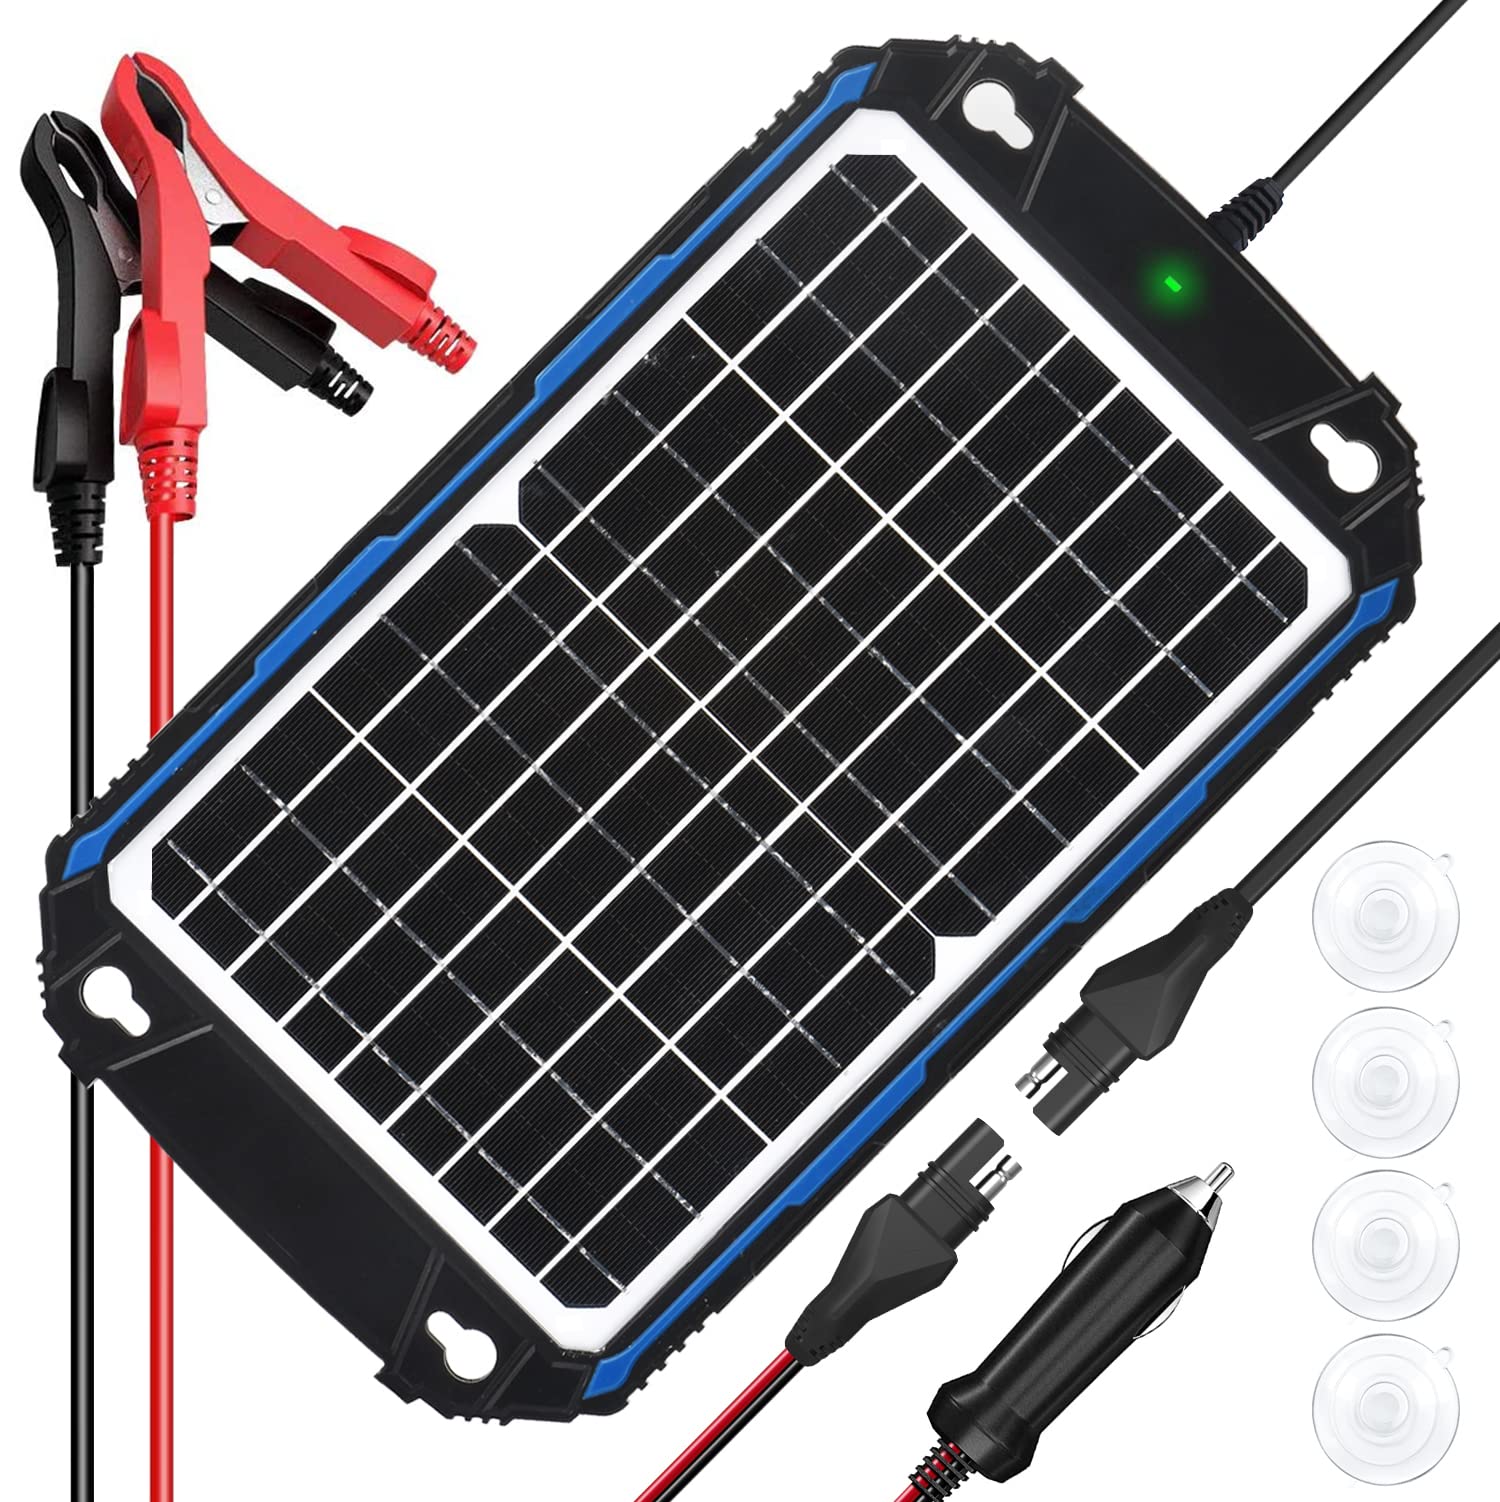 Amazon.com : SUNER POWER Waterproof 12W 12V Solar Battery Charger & Maintainer Pro, Built-in Intelligent MPPT Charge Controller, $50.59